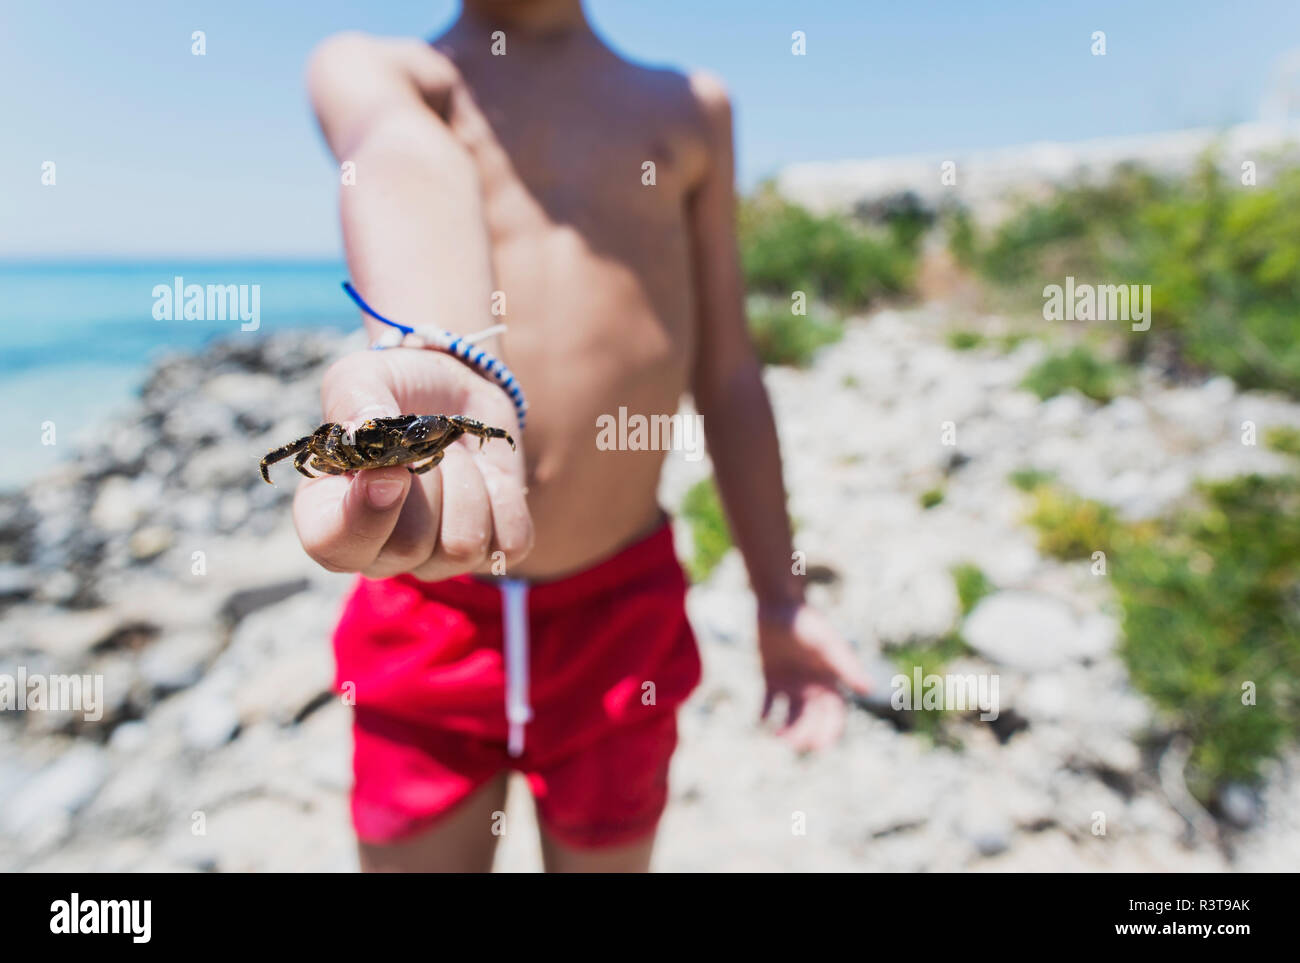 Close-up of boy holding a crab on the beach Stock Photo